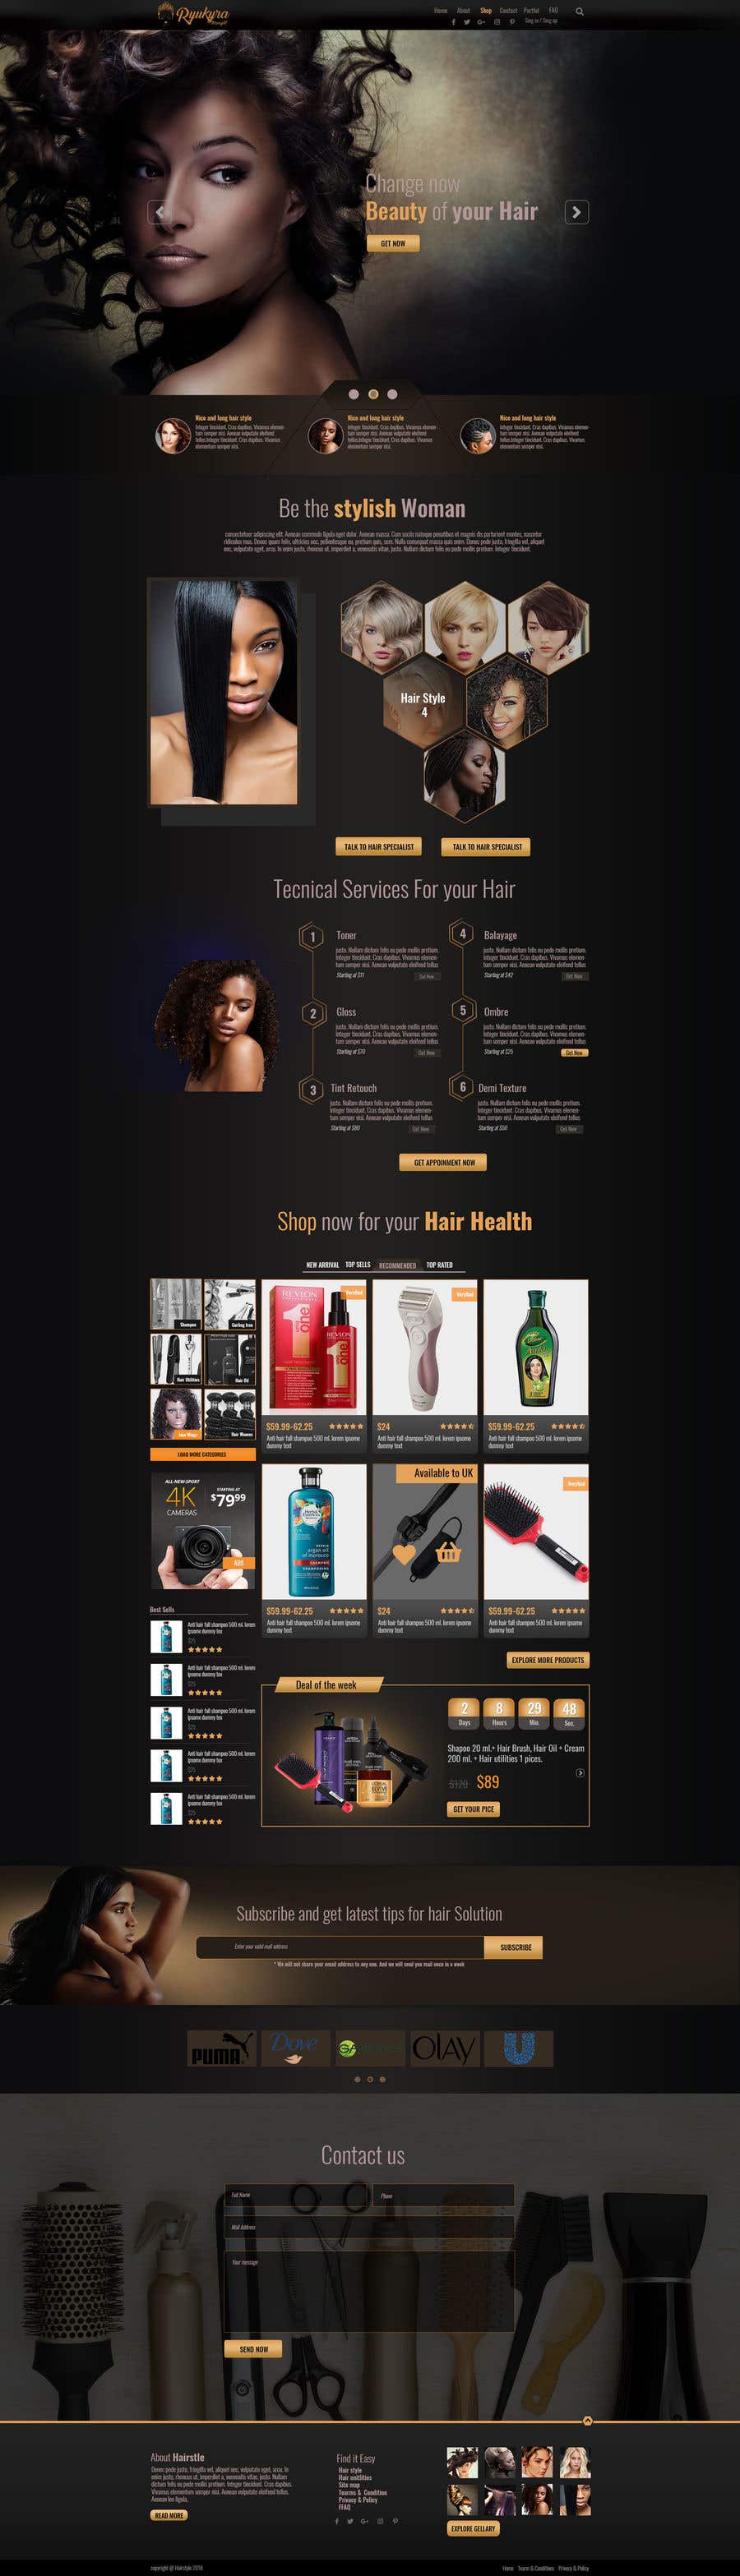 Entry #11 by webhubbd for Basic Landing Page Design Needed - Hair Care  Industry | Freelancer